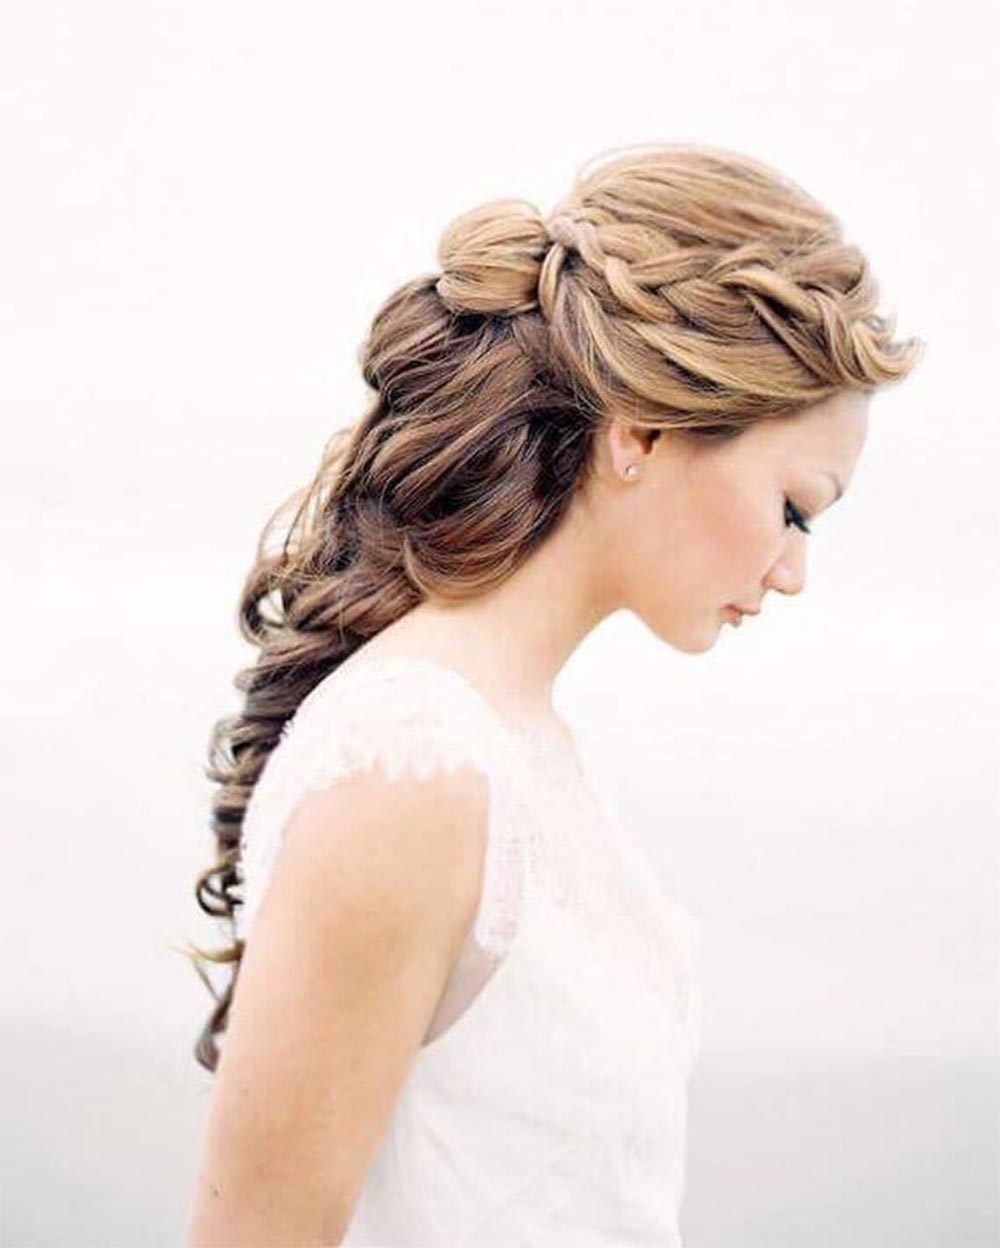 10 Fabulous French Braid Updo Hairstyles  Pretty Designs